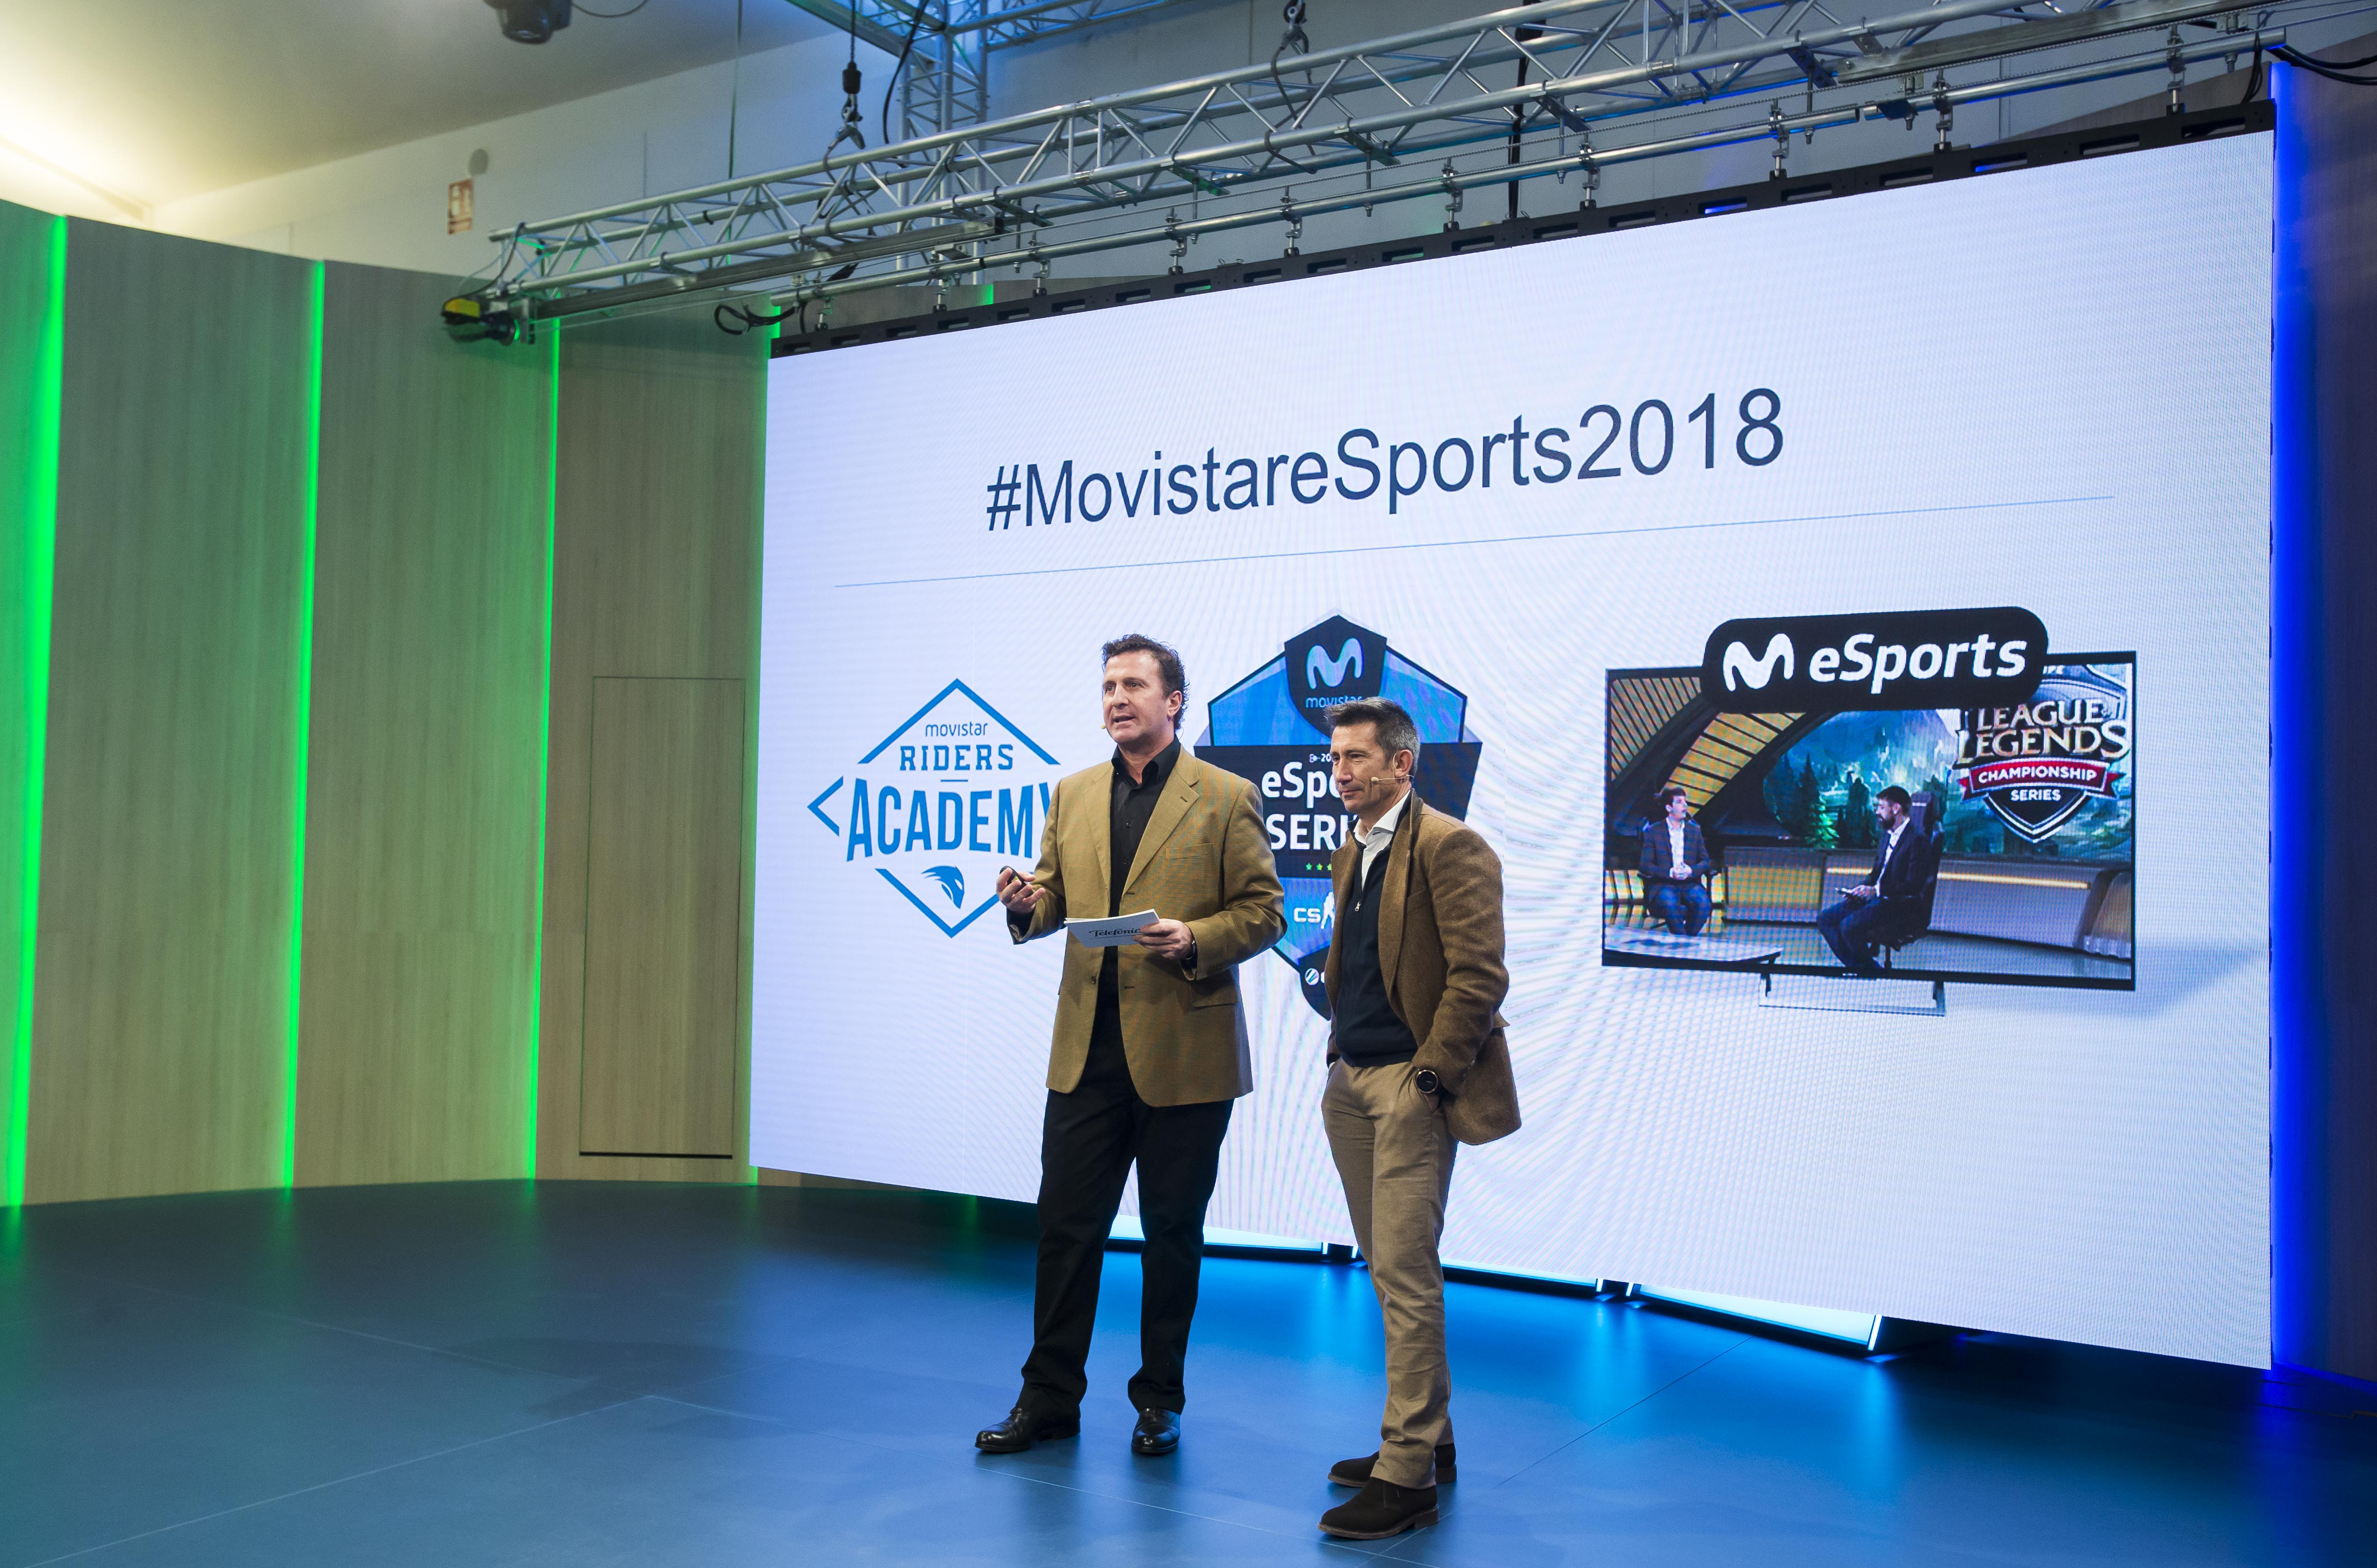 From left to right: Dante Cacciatore, Director of Communications, Brand, and Customer Experience at Telefónica España, Carlos Martínez, Director of Sports Contents at Movistar+